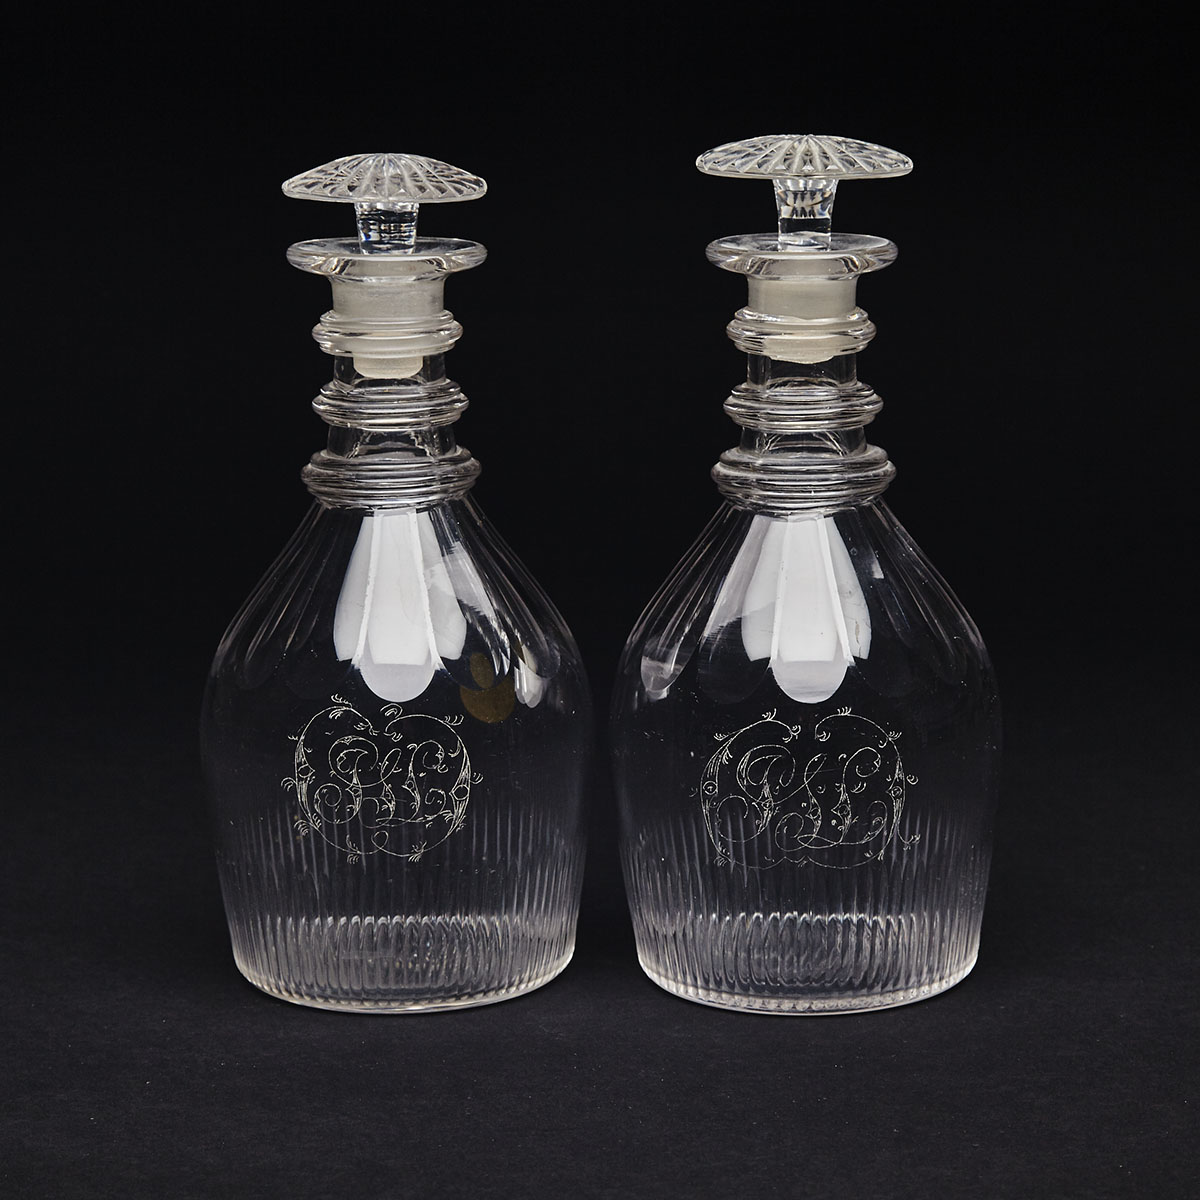 Pair of Anglo-Irish Cut Glass Decanters, c.1800